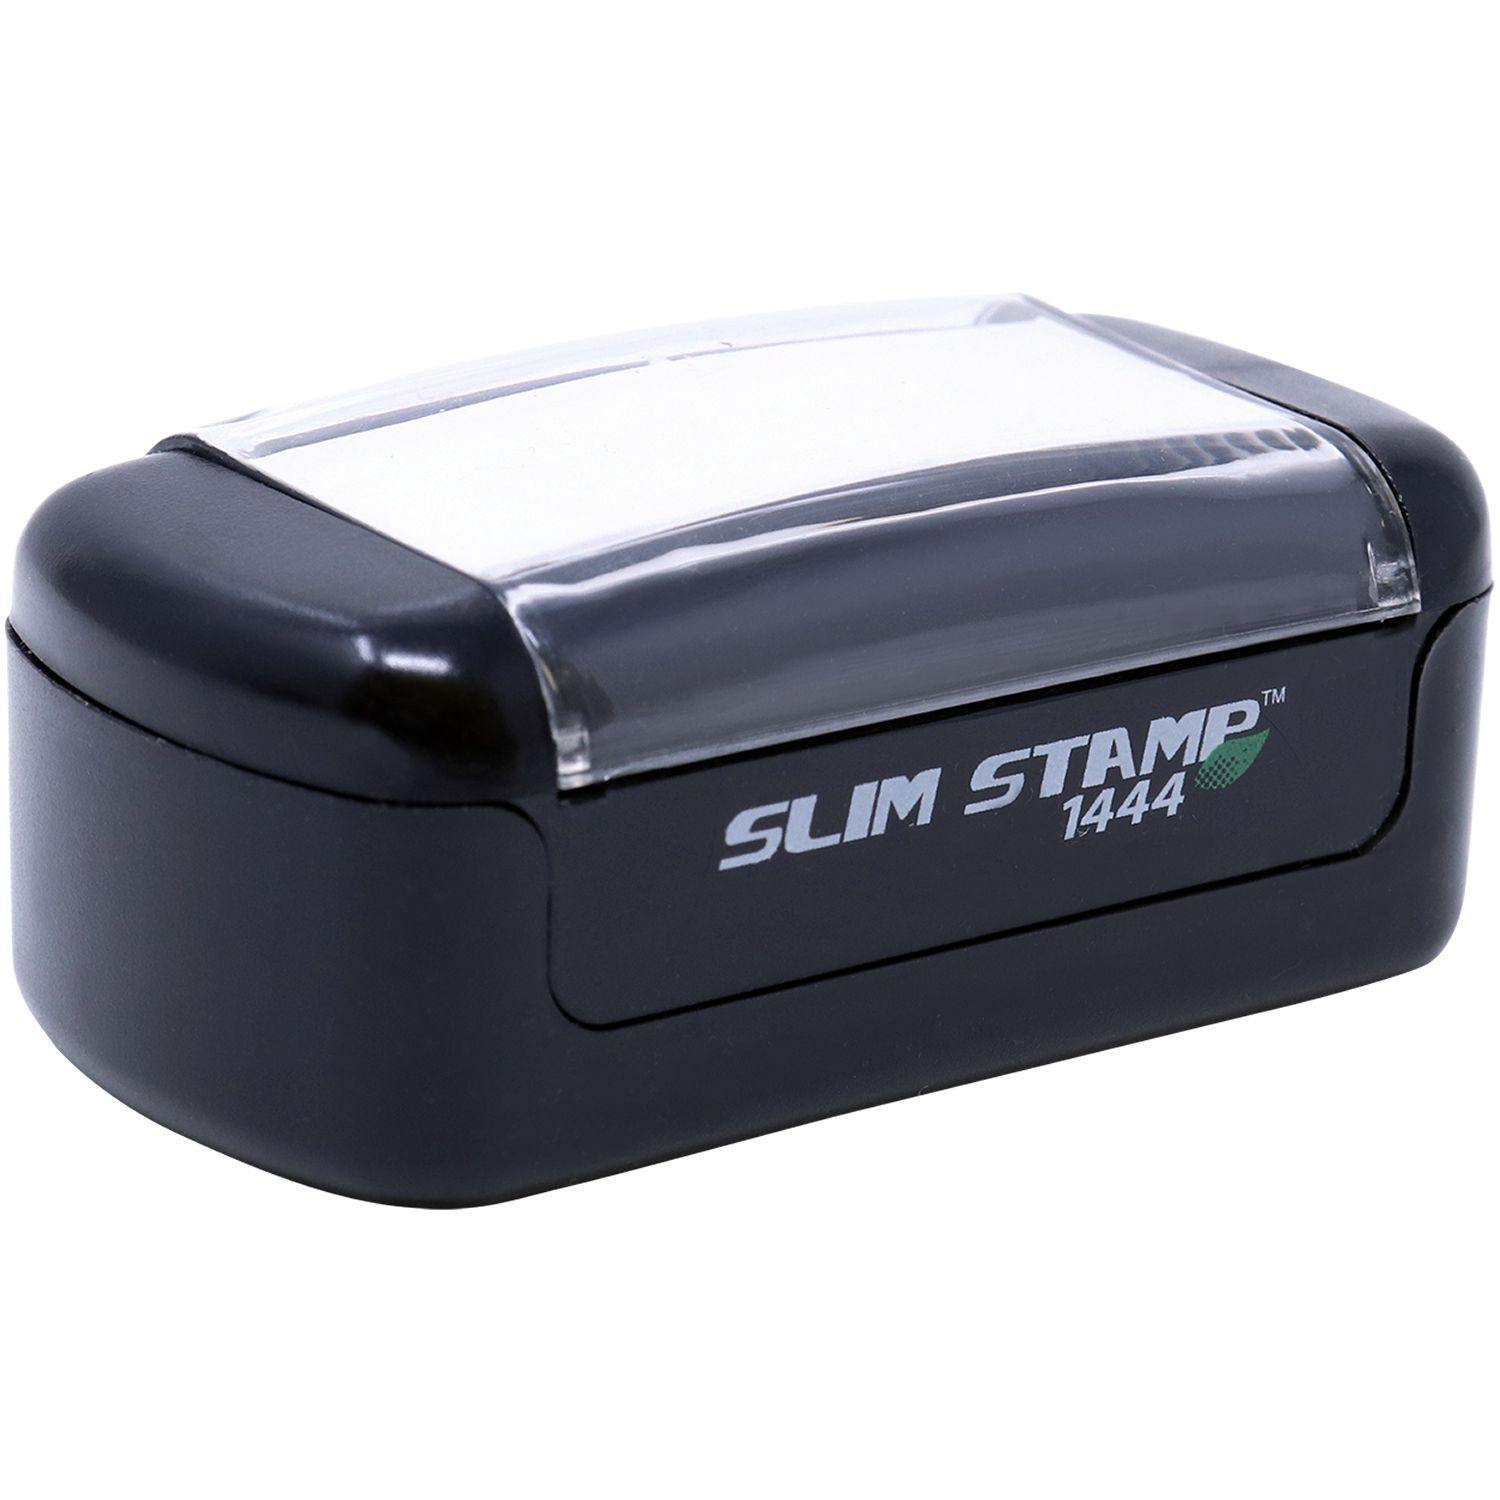 Alt View of Slim Pre Inked Notarize Stamp Mount Angle